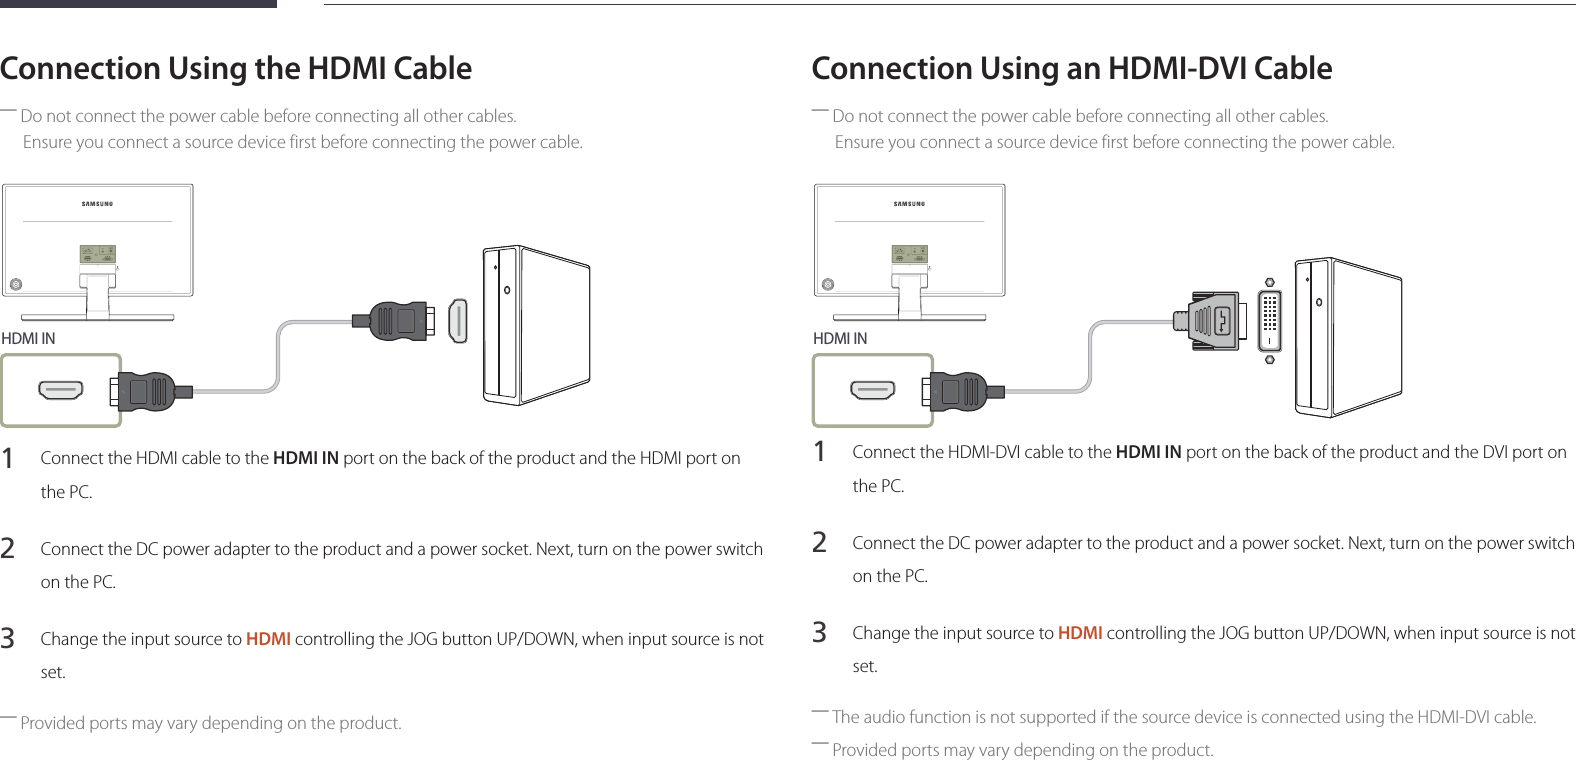 23Connection Using the HDMI Cable ―Do not connect the power cable before connecting all other cables.Ensure you connect a source device first before connecting the power cable.HDMI IN1 Connect the HDMI cable to the HDMI IN port on the back of the product and the HDMI port on the PC.2 Connect the DC power adapter to the product and a power socket. Next, turn on the power switch on the PC.3 Change the input source to HDMI controlling the JOG button UP/DOWN, when input source is not set. ―Provided ports may vary depending on the product.Connection Using an HDMI-DVI Cable ―Do not connect the power cable before connecting all other cables. Ensure you connect a source device first before connecting the power cable.HDMI IN1 Connect the HDMI-DVI cable to the HDMI IN port on the back of the product and the DVI port on the PC.2 Connect the DC power adapter to the product and a power socket. Next, turn on the power switch on the PC.3 Change the input source to HDMI controlling the JOG button UP/DOWN, when input source is not set. ―The audio function is not supported if the source device is connected using the HDMI-DVI cable. ―Provided ports may vary depending on the product.